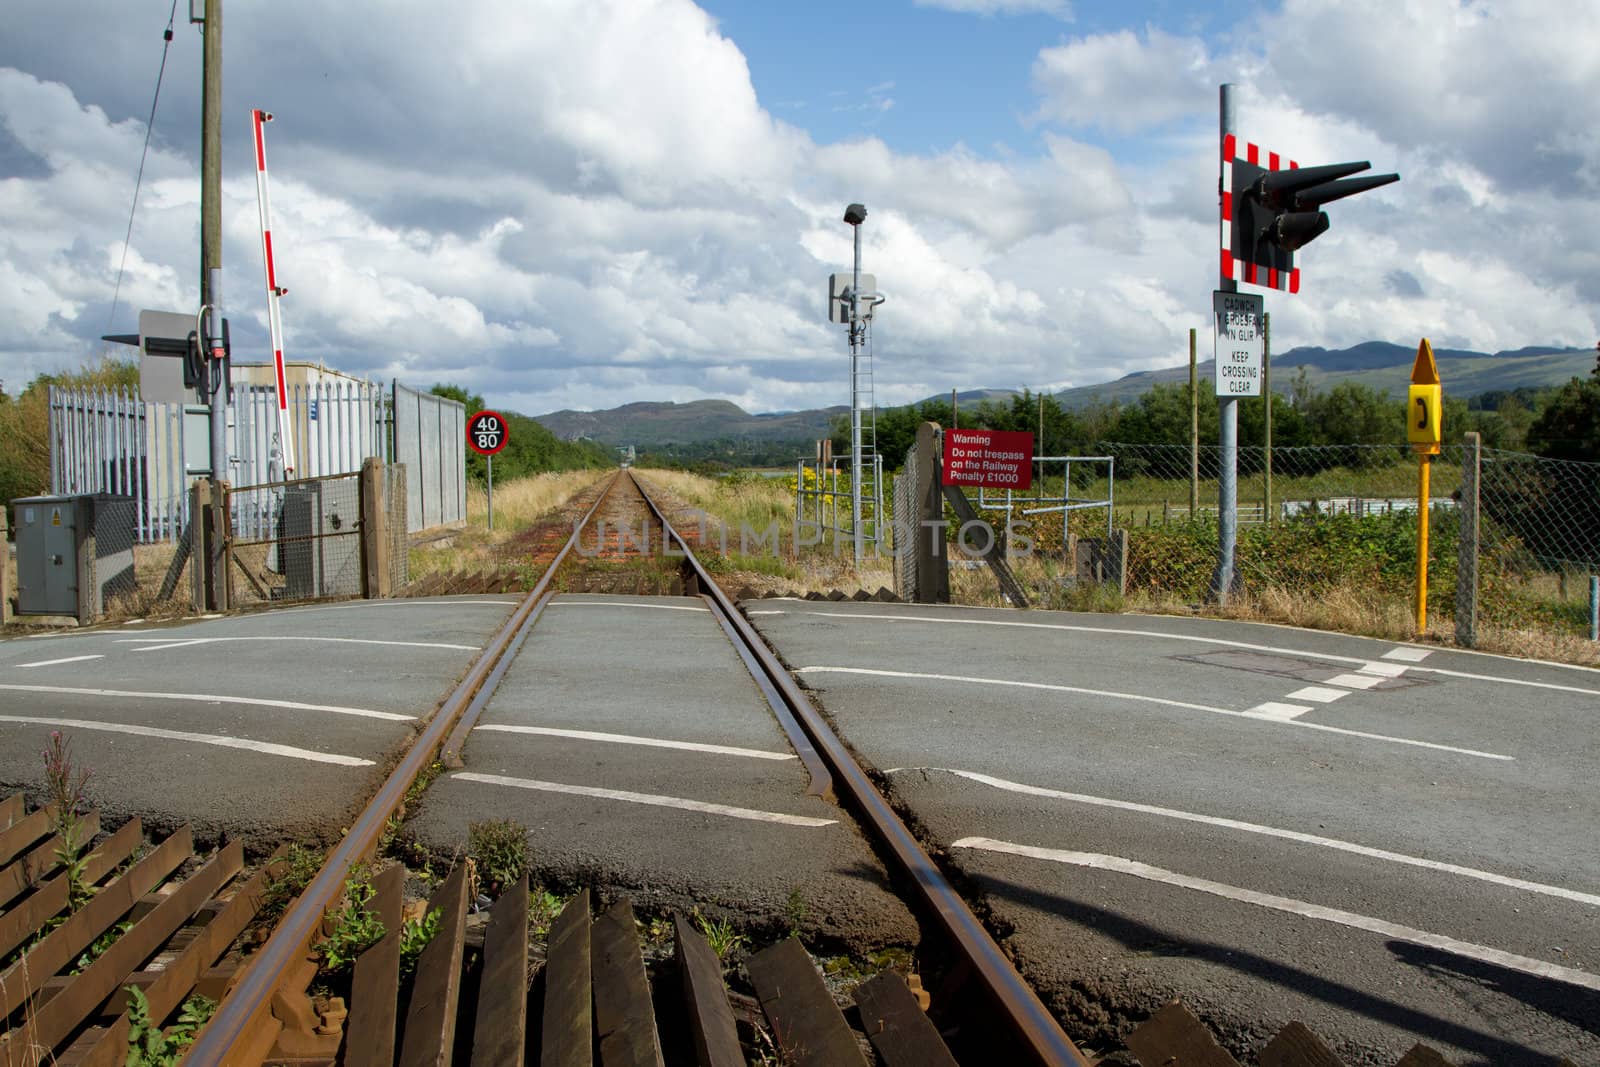 A rail line stretches into the distance with a tarmac road level crossing with safety markings, signs, lights and barriers.